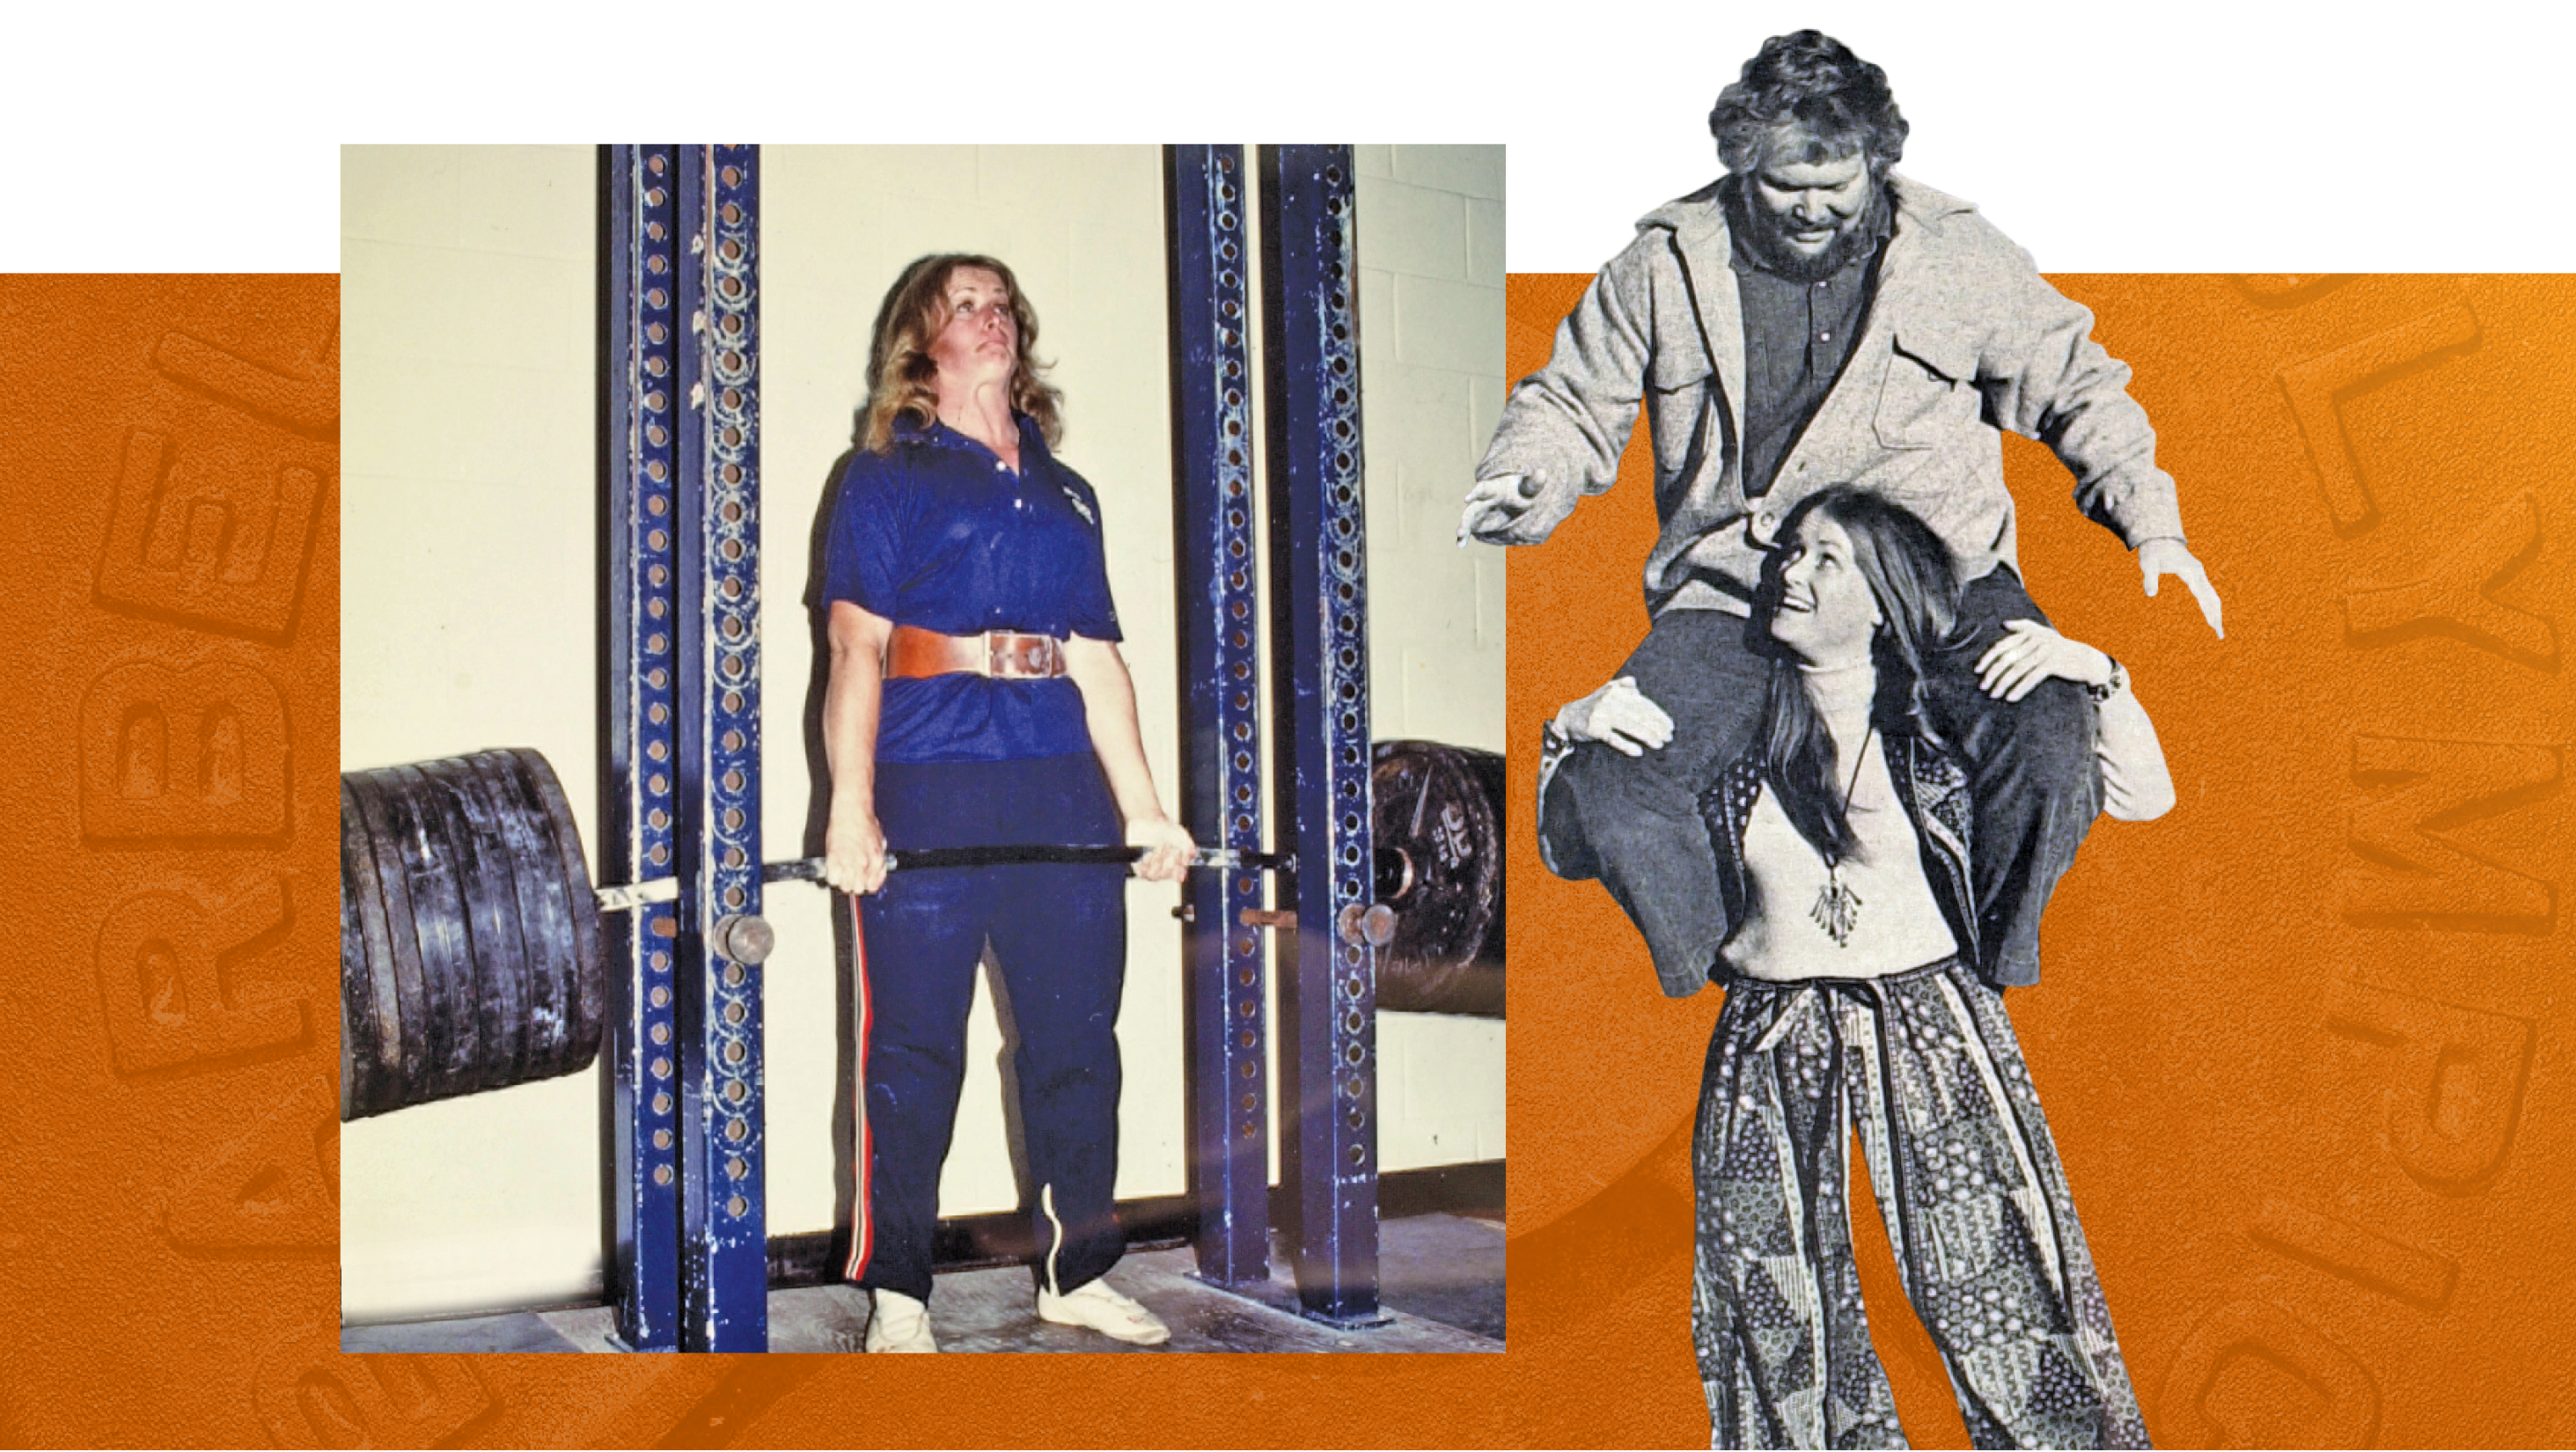 A color photo of Jan Todd powerlifting weights and another black and white photo of her with Terry on her shoulders